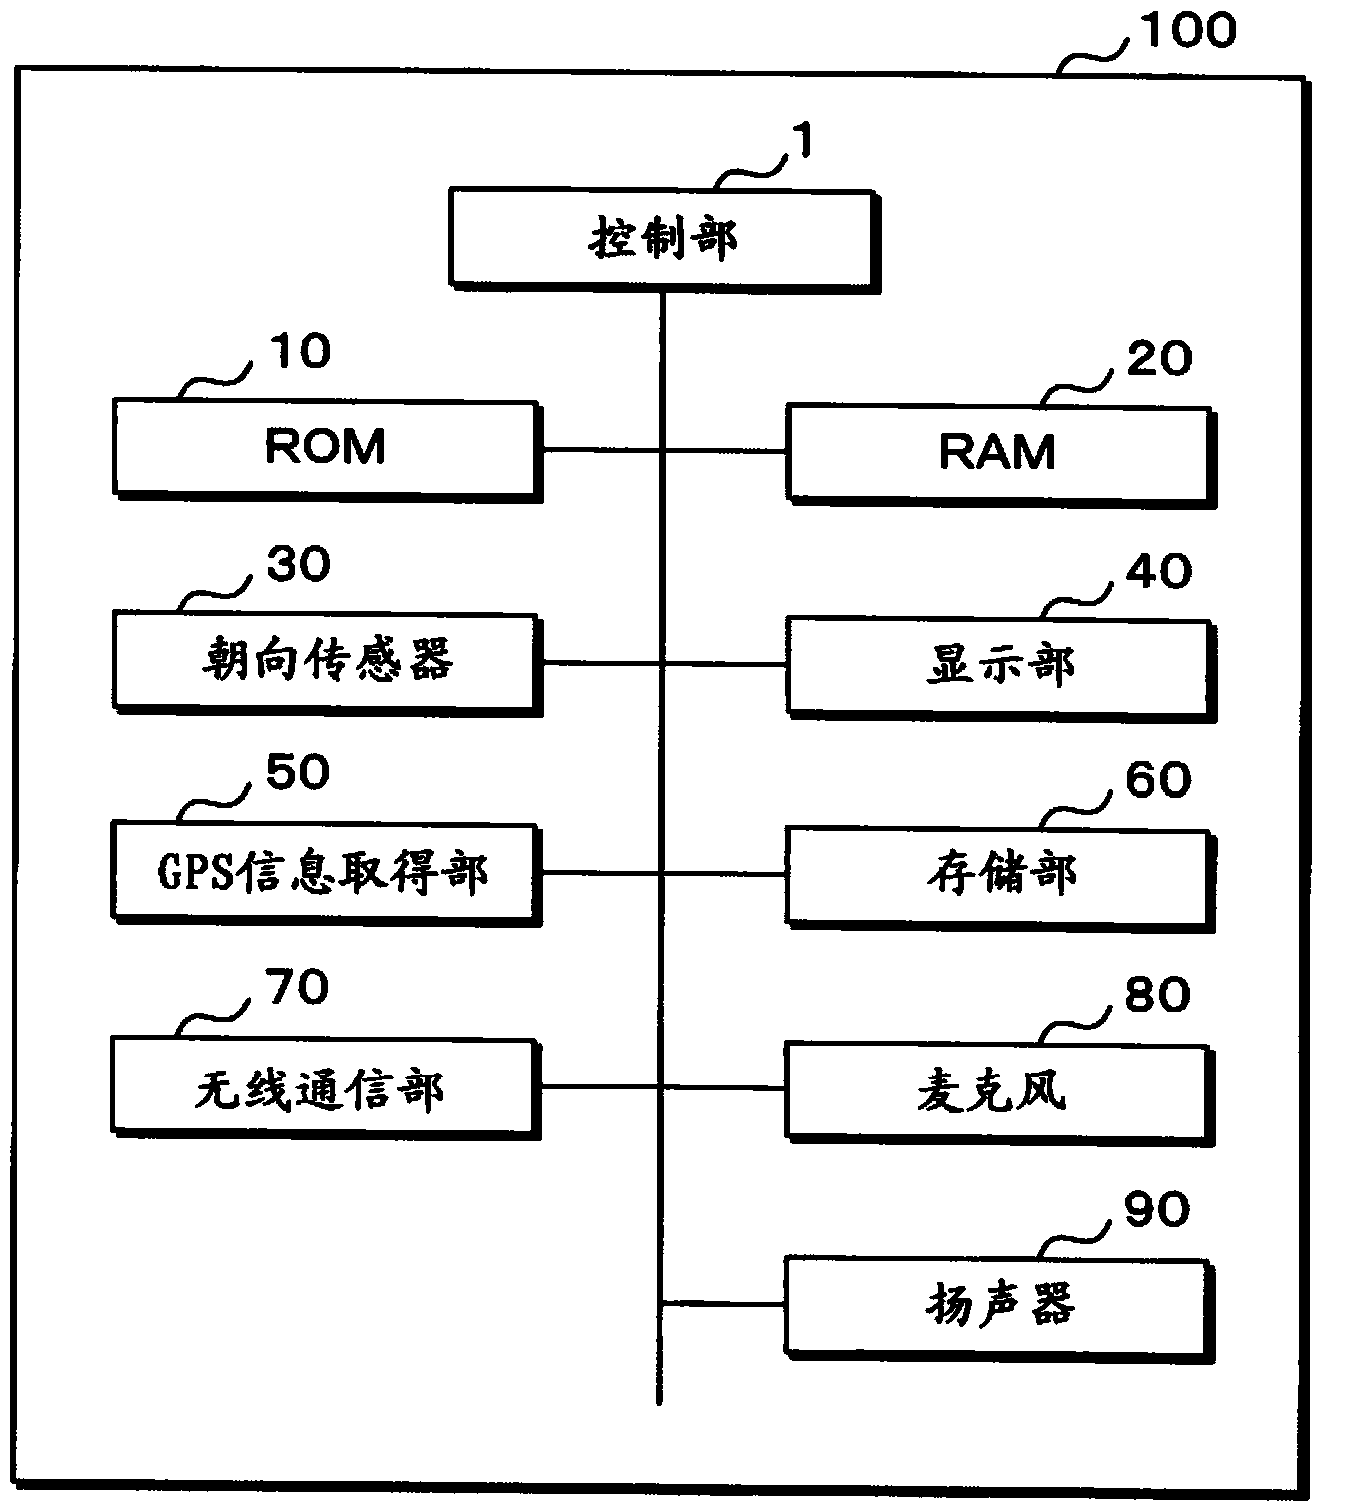 Communication system and specification method